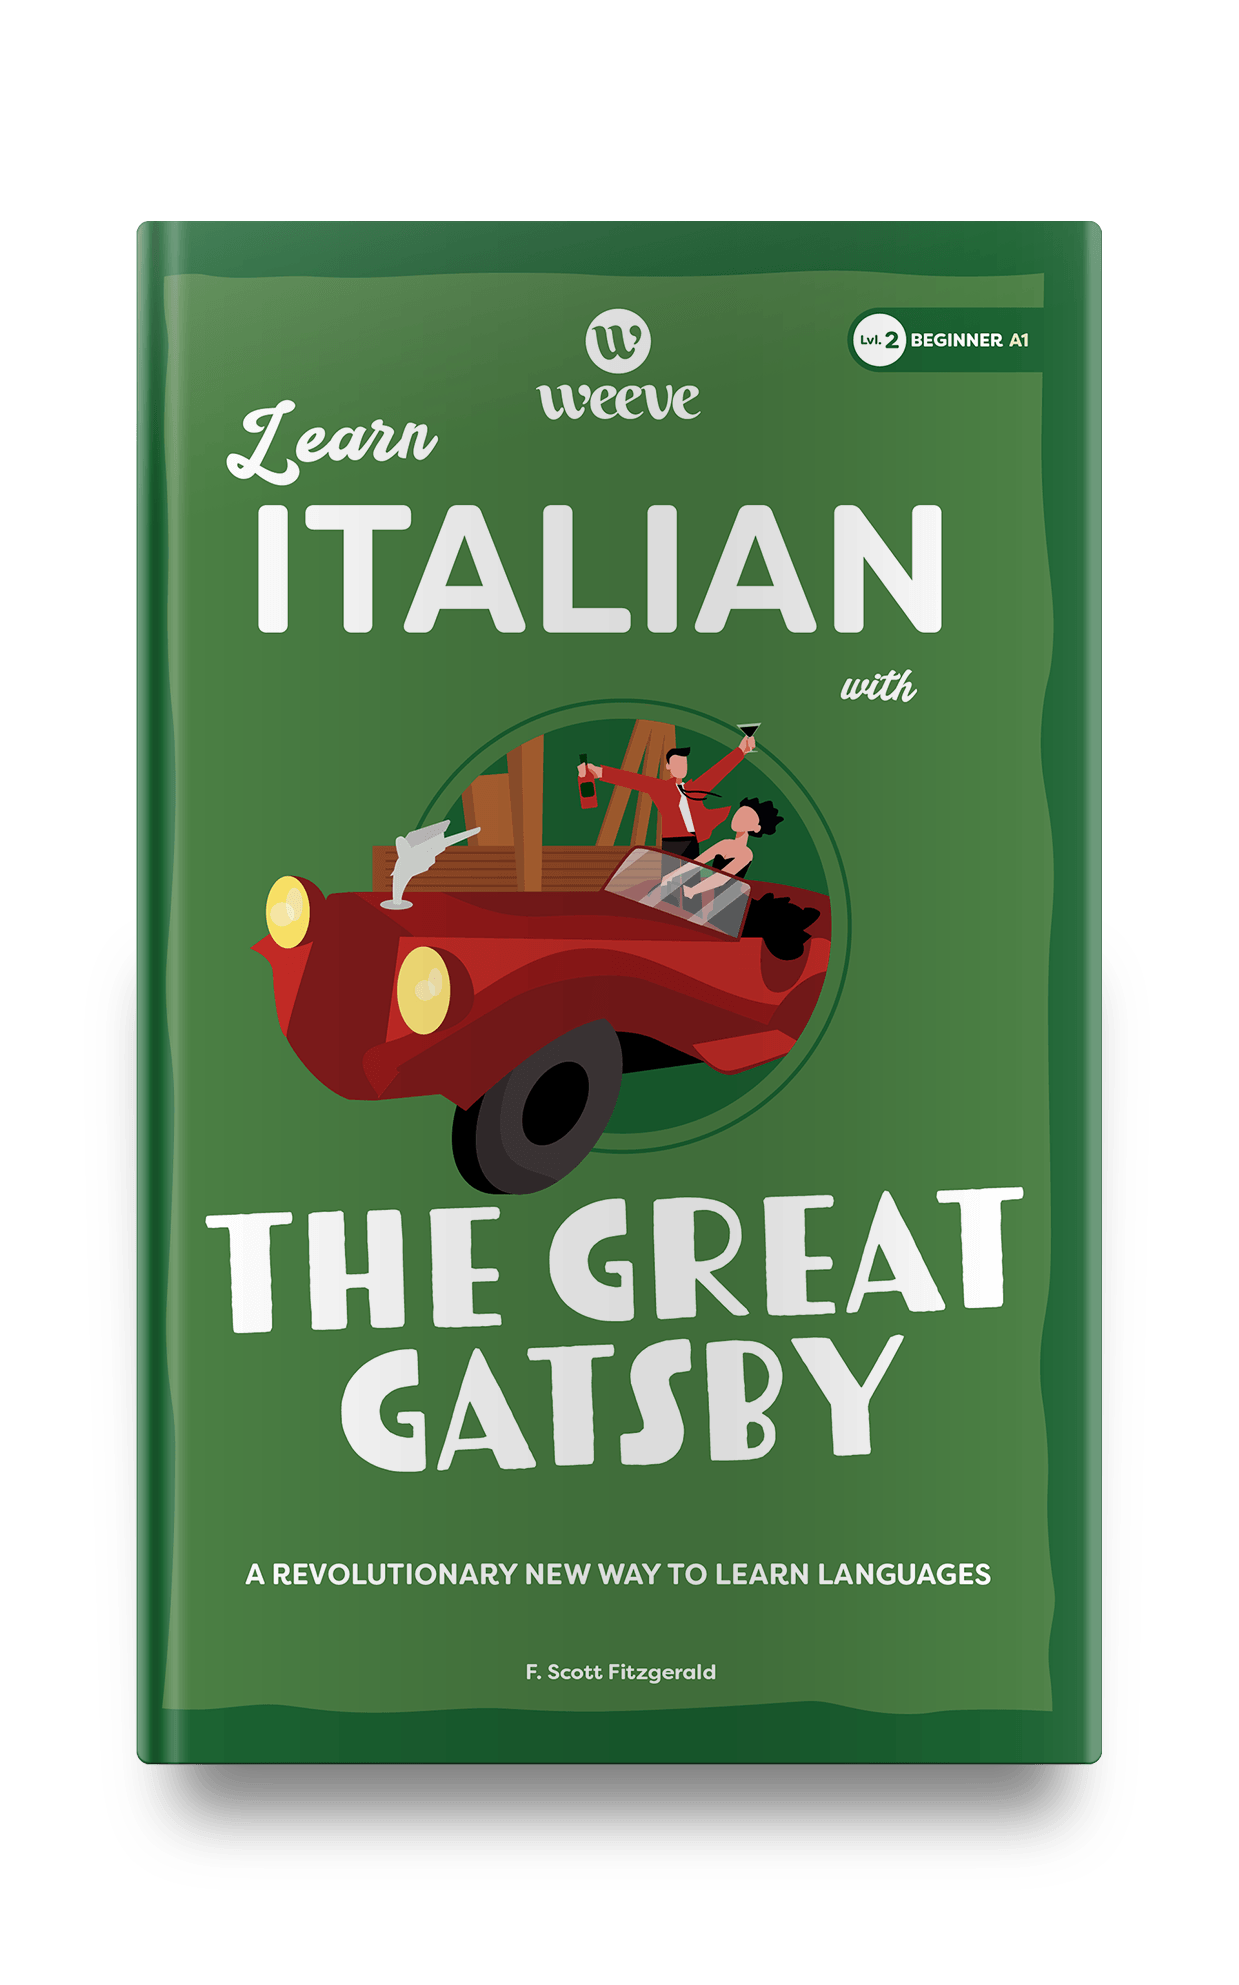 Learn Italian with The Great Gatsby - Weeve